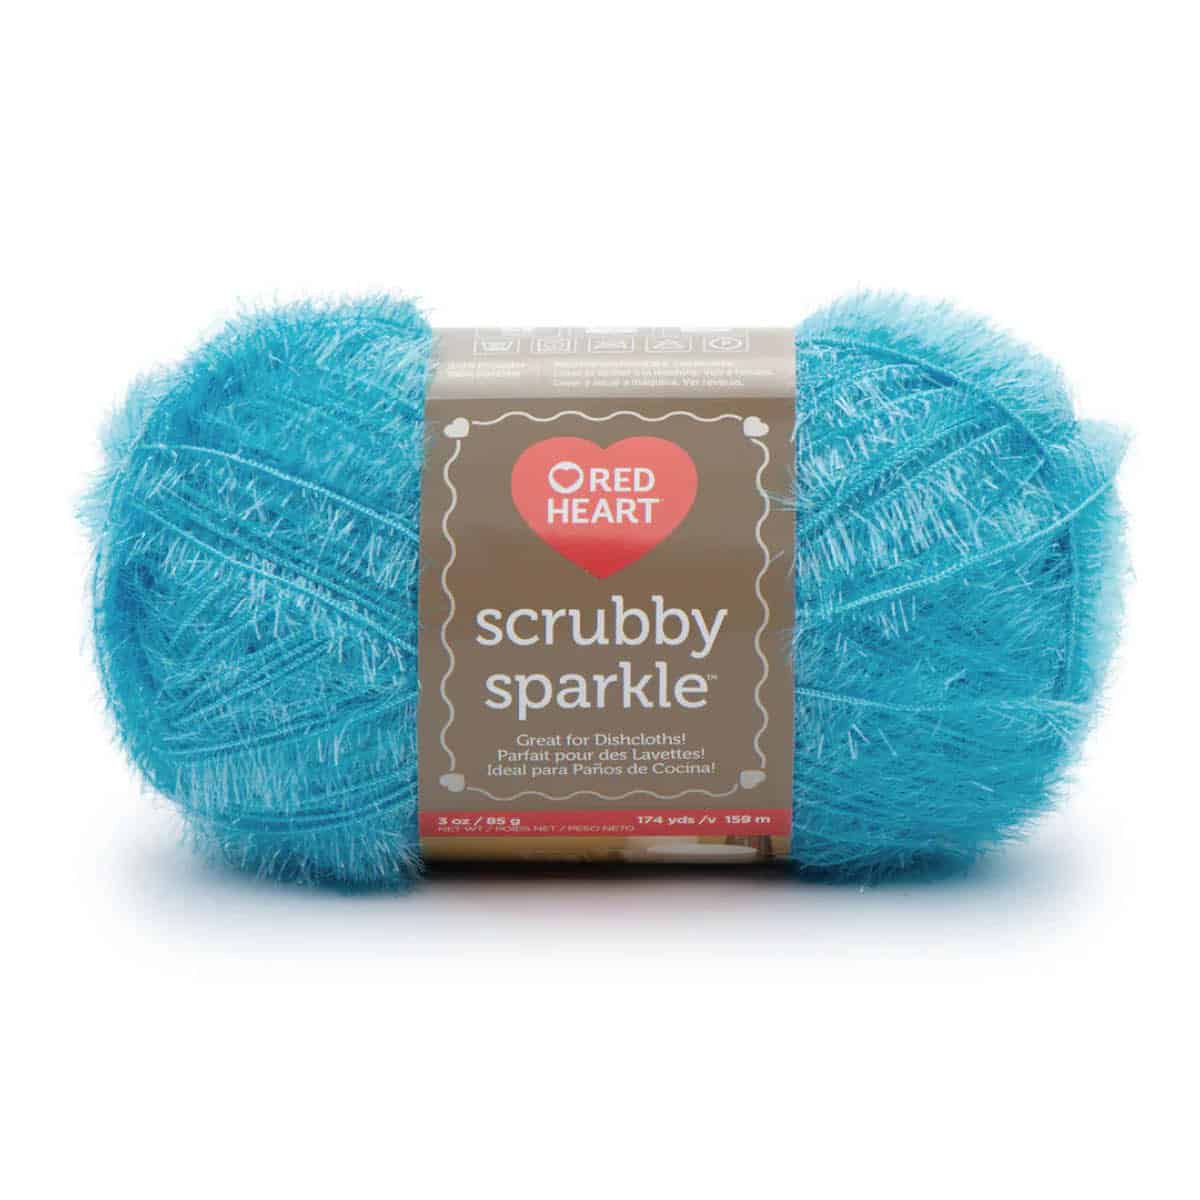 Red Heart Scrubby Sparkle Yarn Product